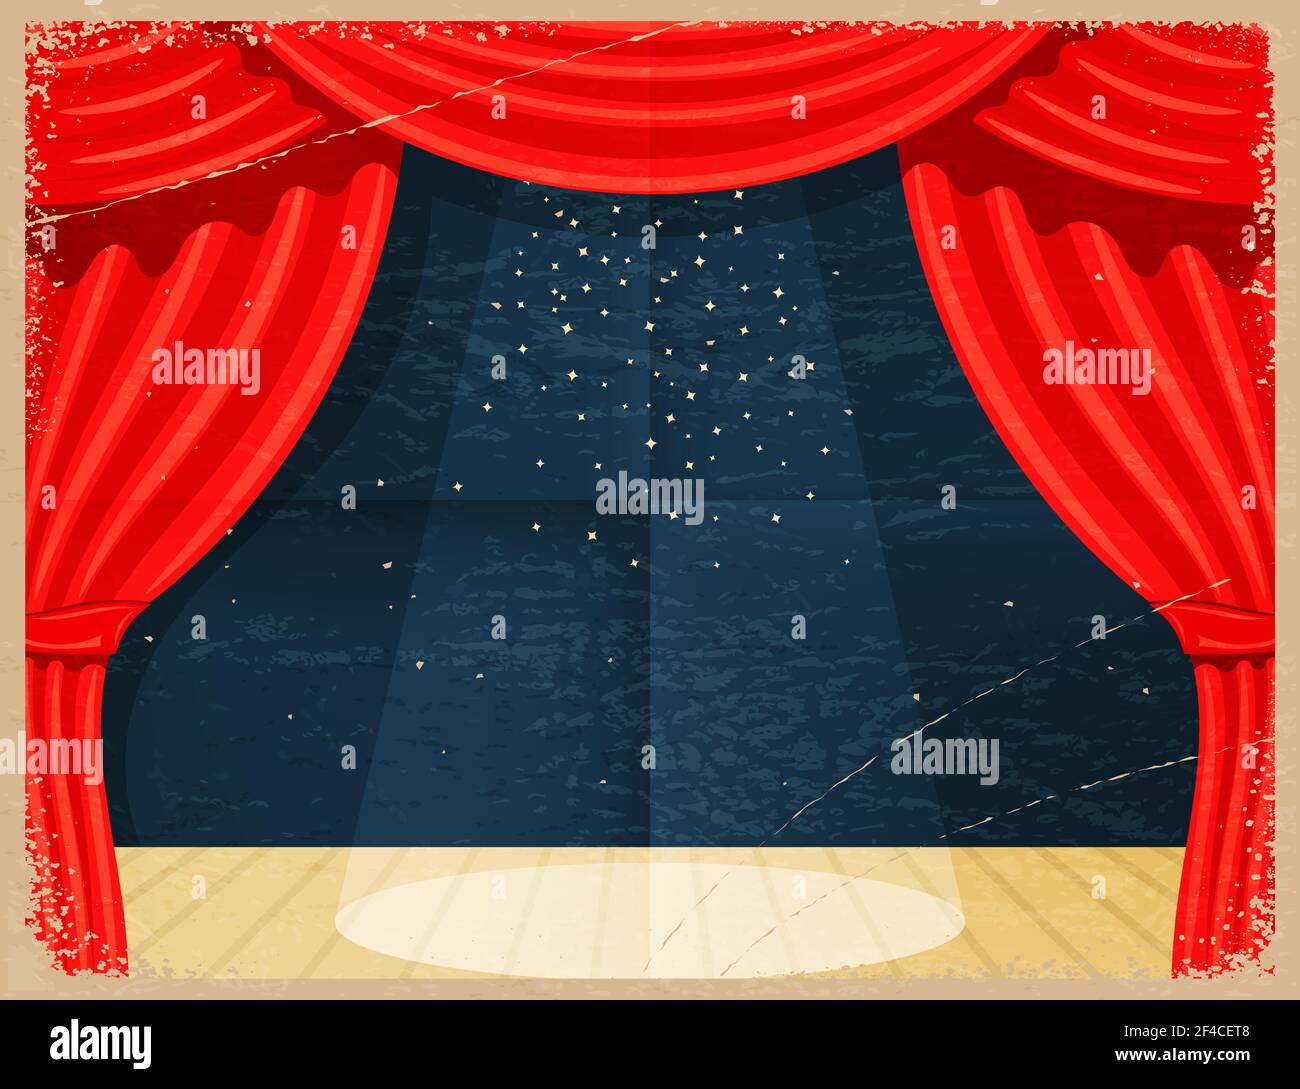 Vintage Cartoon theater. Theater curtain with spotlights beam and stars. Retro Open theater curtain. Red silk side scenes on stage. Stock vector Stock Vector